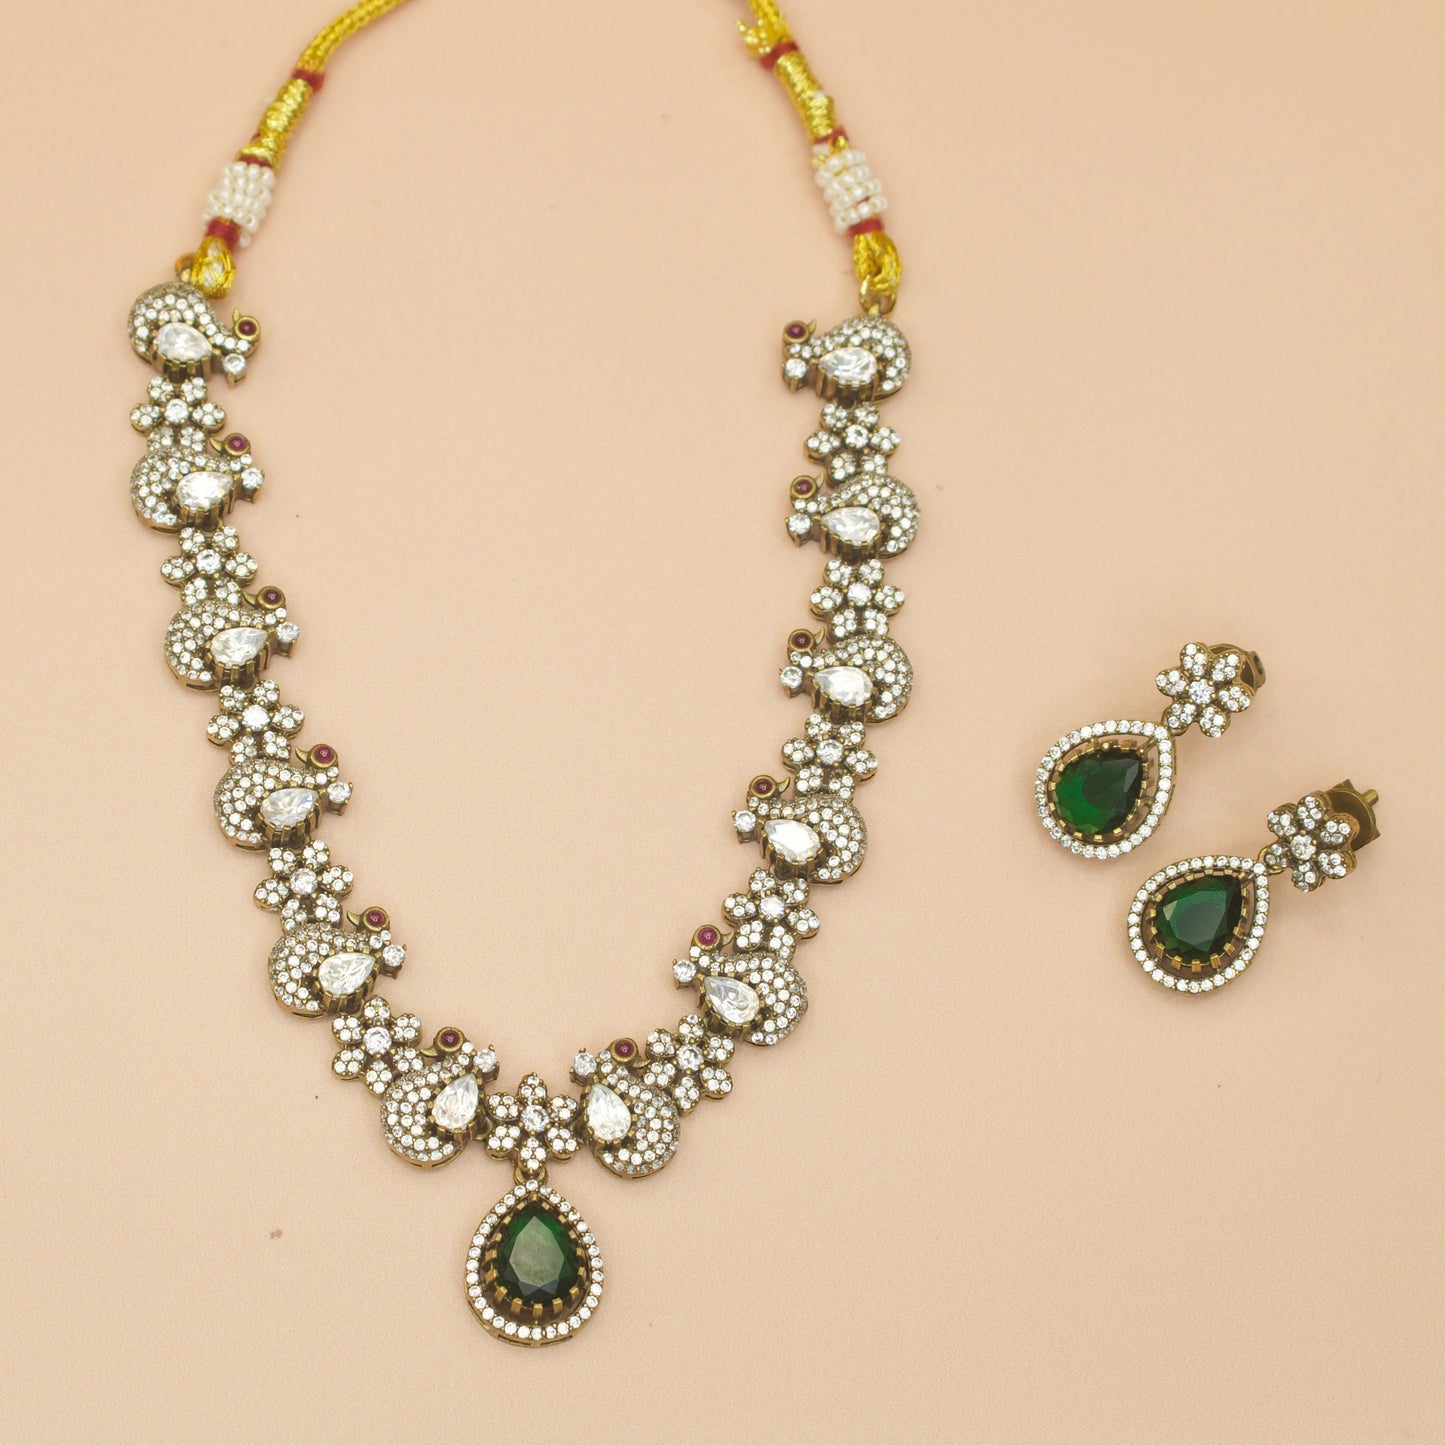 Simple Peacock Victorian Necklace Set with pearl drop earrings